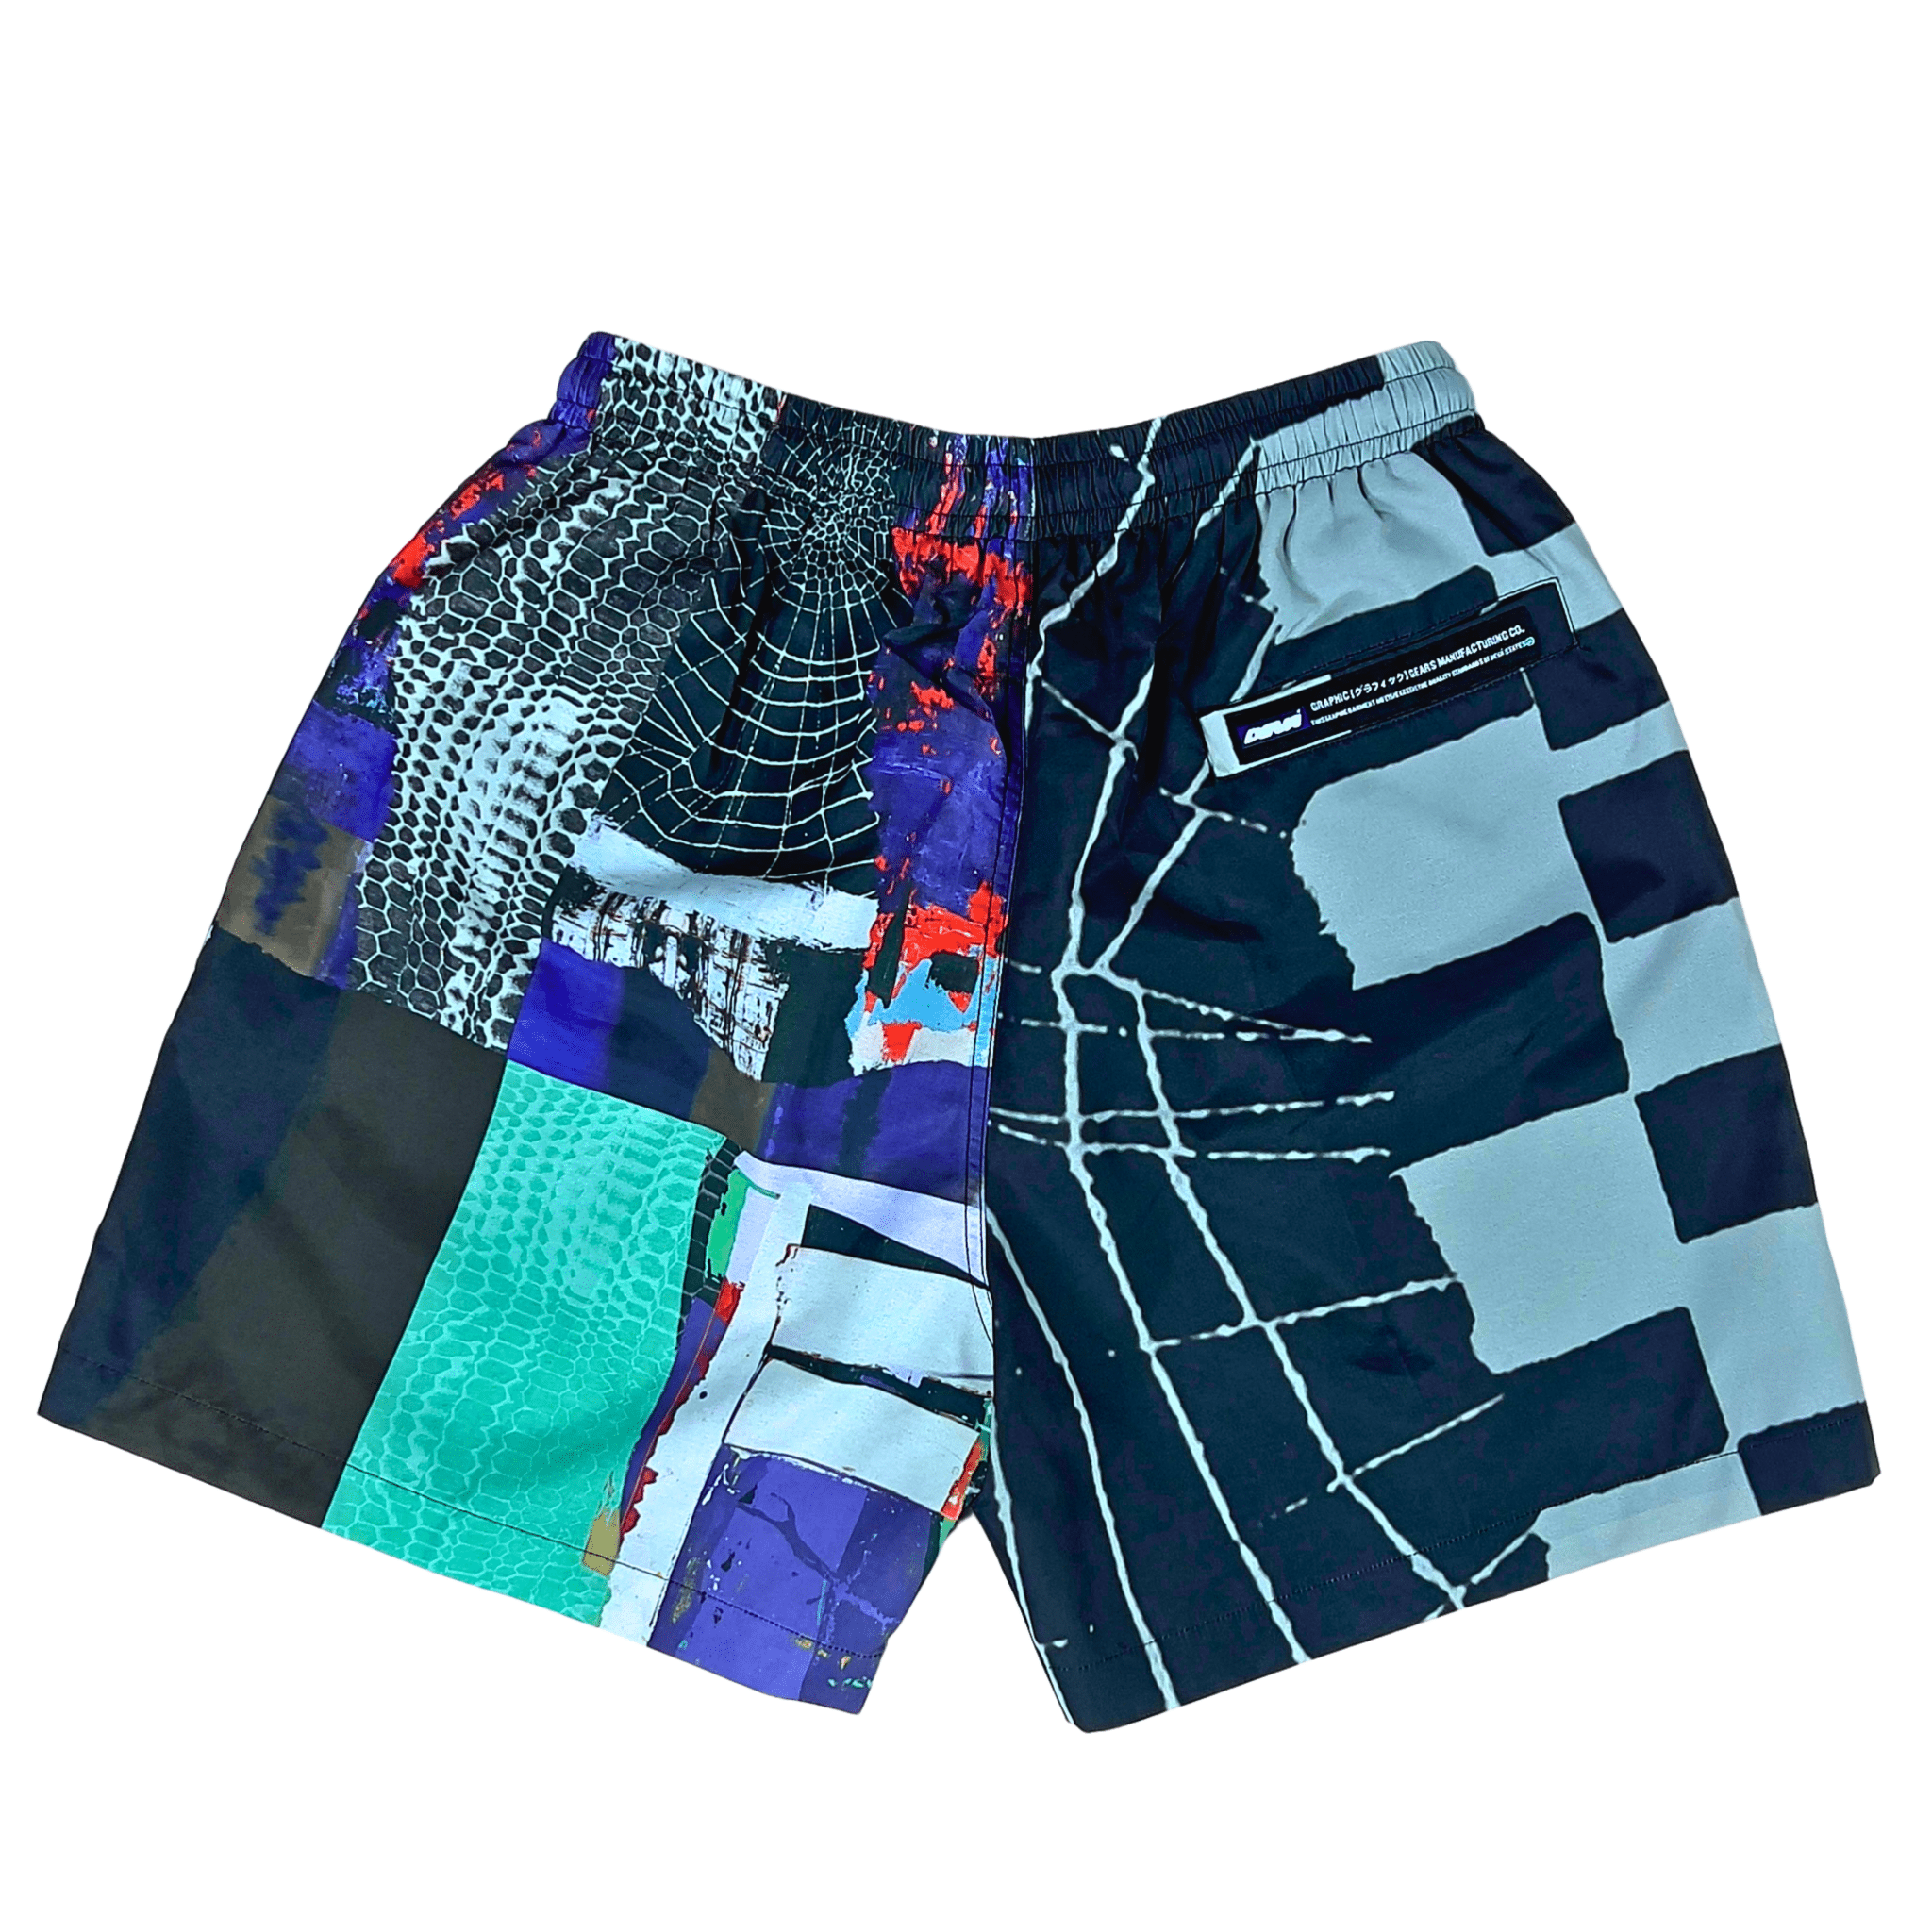 Particula Printed Nylon Shorts in multi - Devá States - State Of Flux